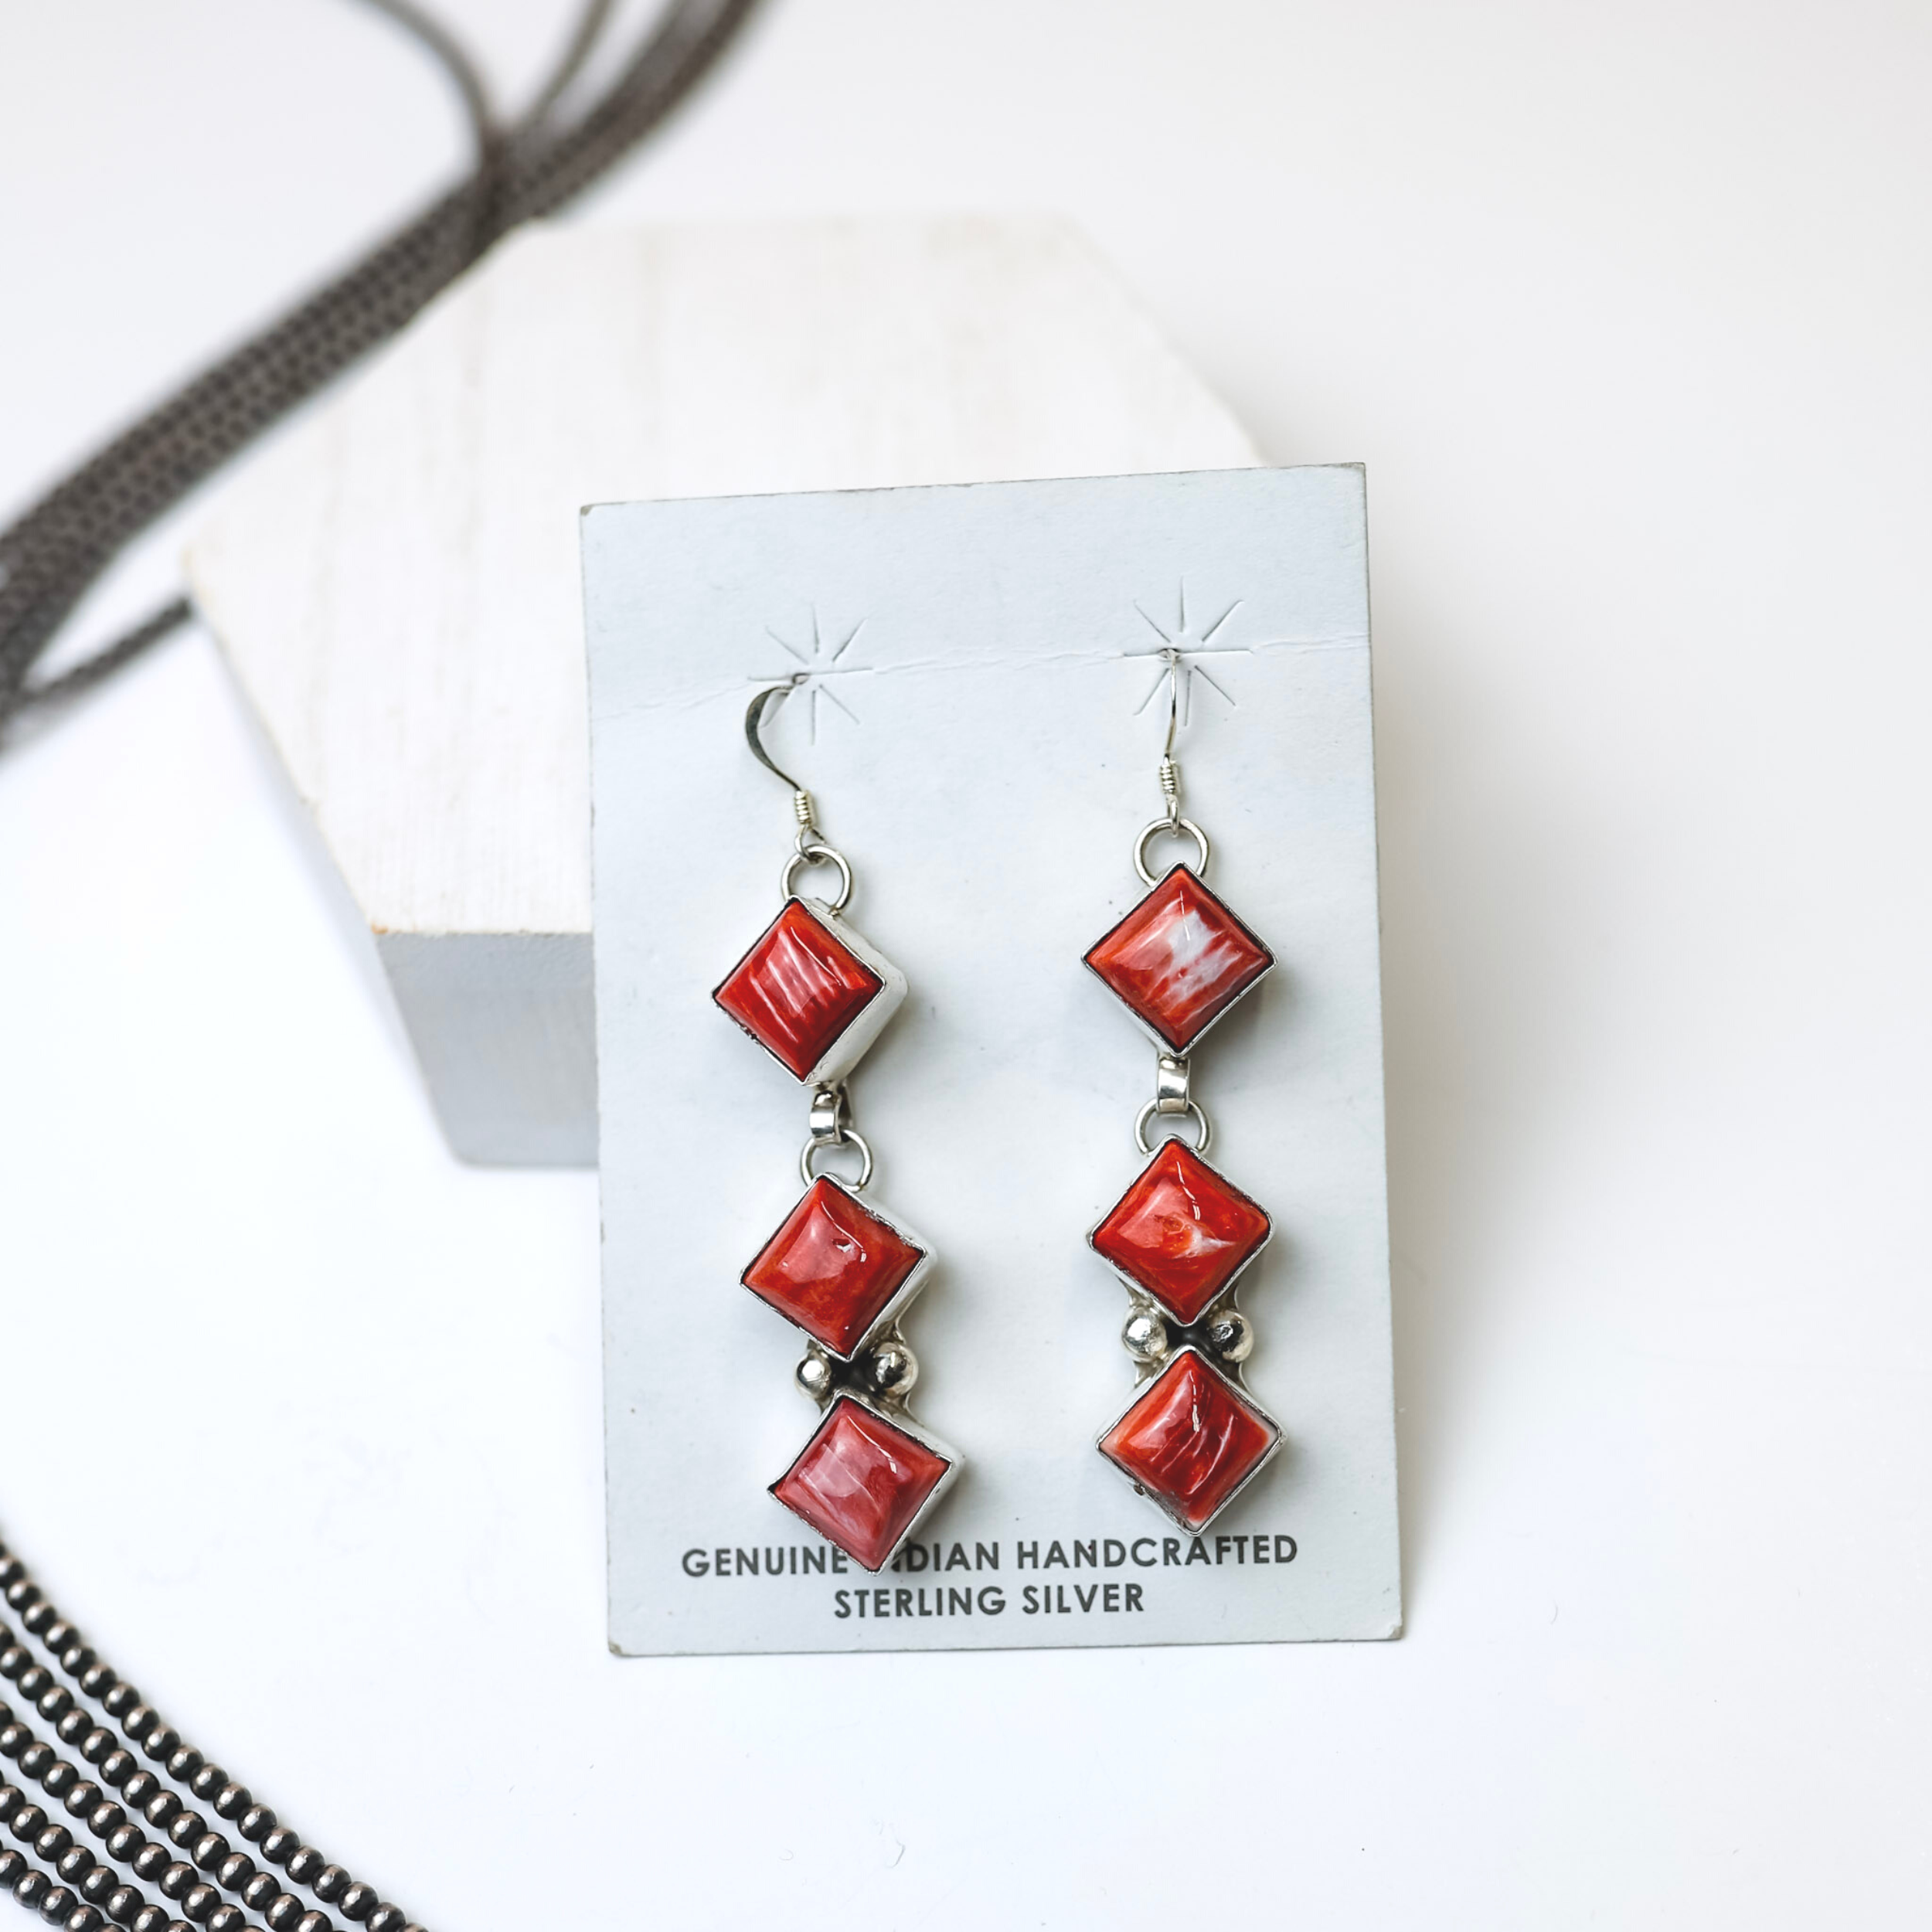 Gabby Spencer Navajo Handmade Red Spiny Oyster Three Stone Drop Earrings are centered in the picture, with navajo pearls laid on the left of the earrings. All on a white background. 